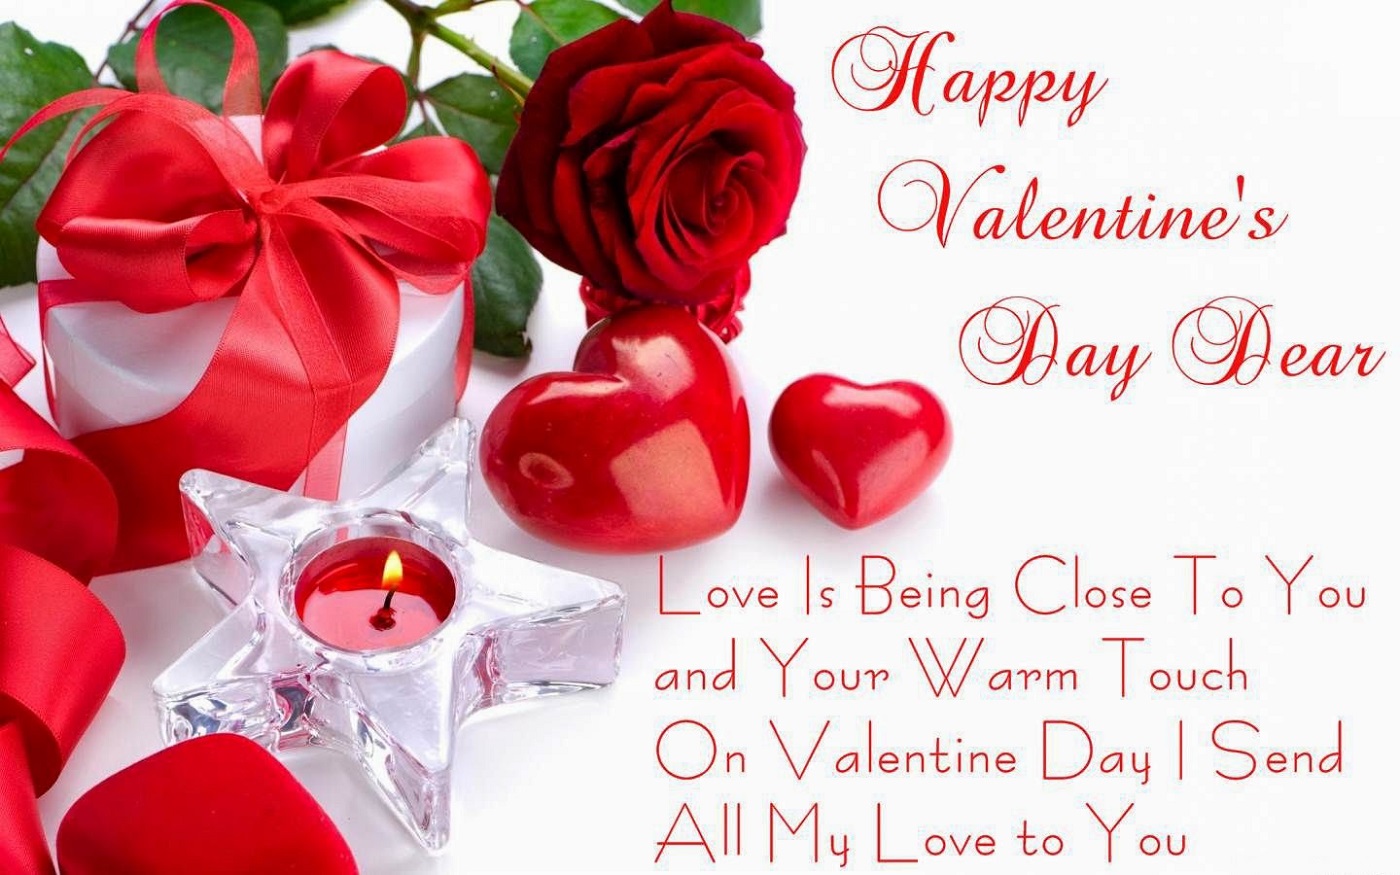 Happy Valentines Day images Quotes